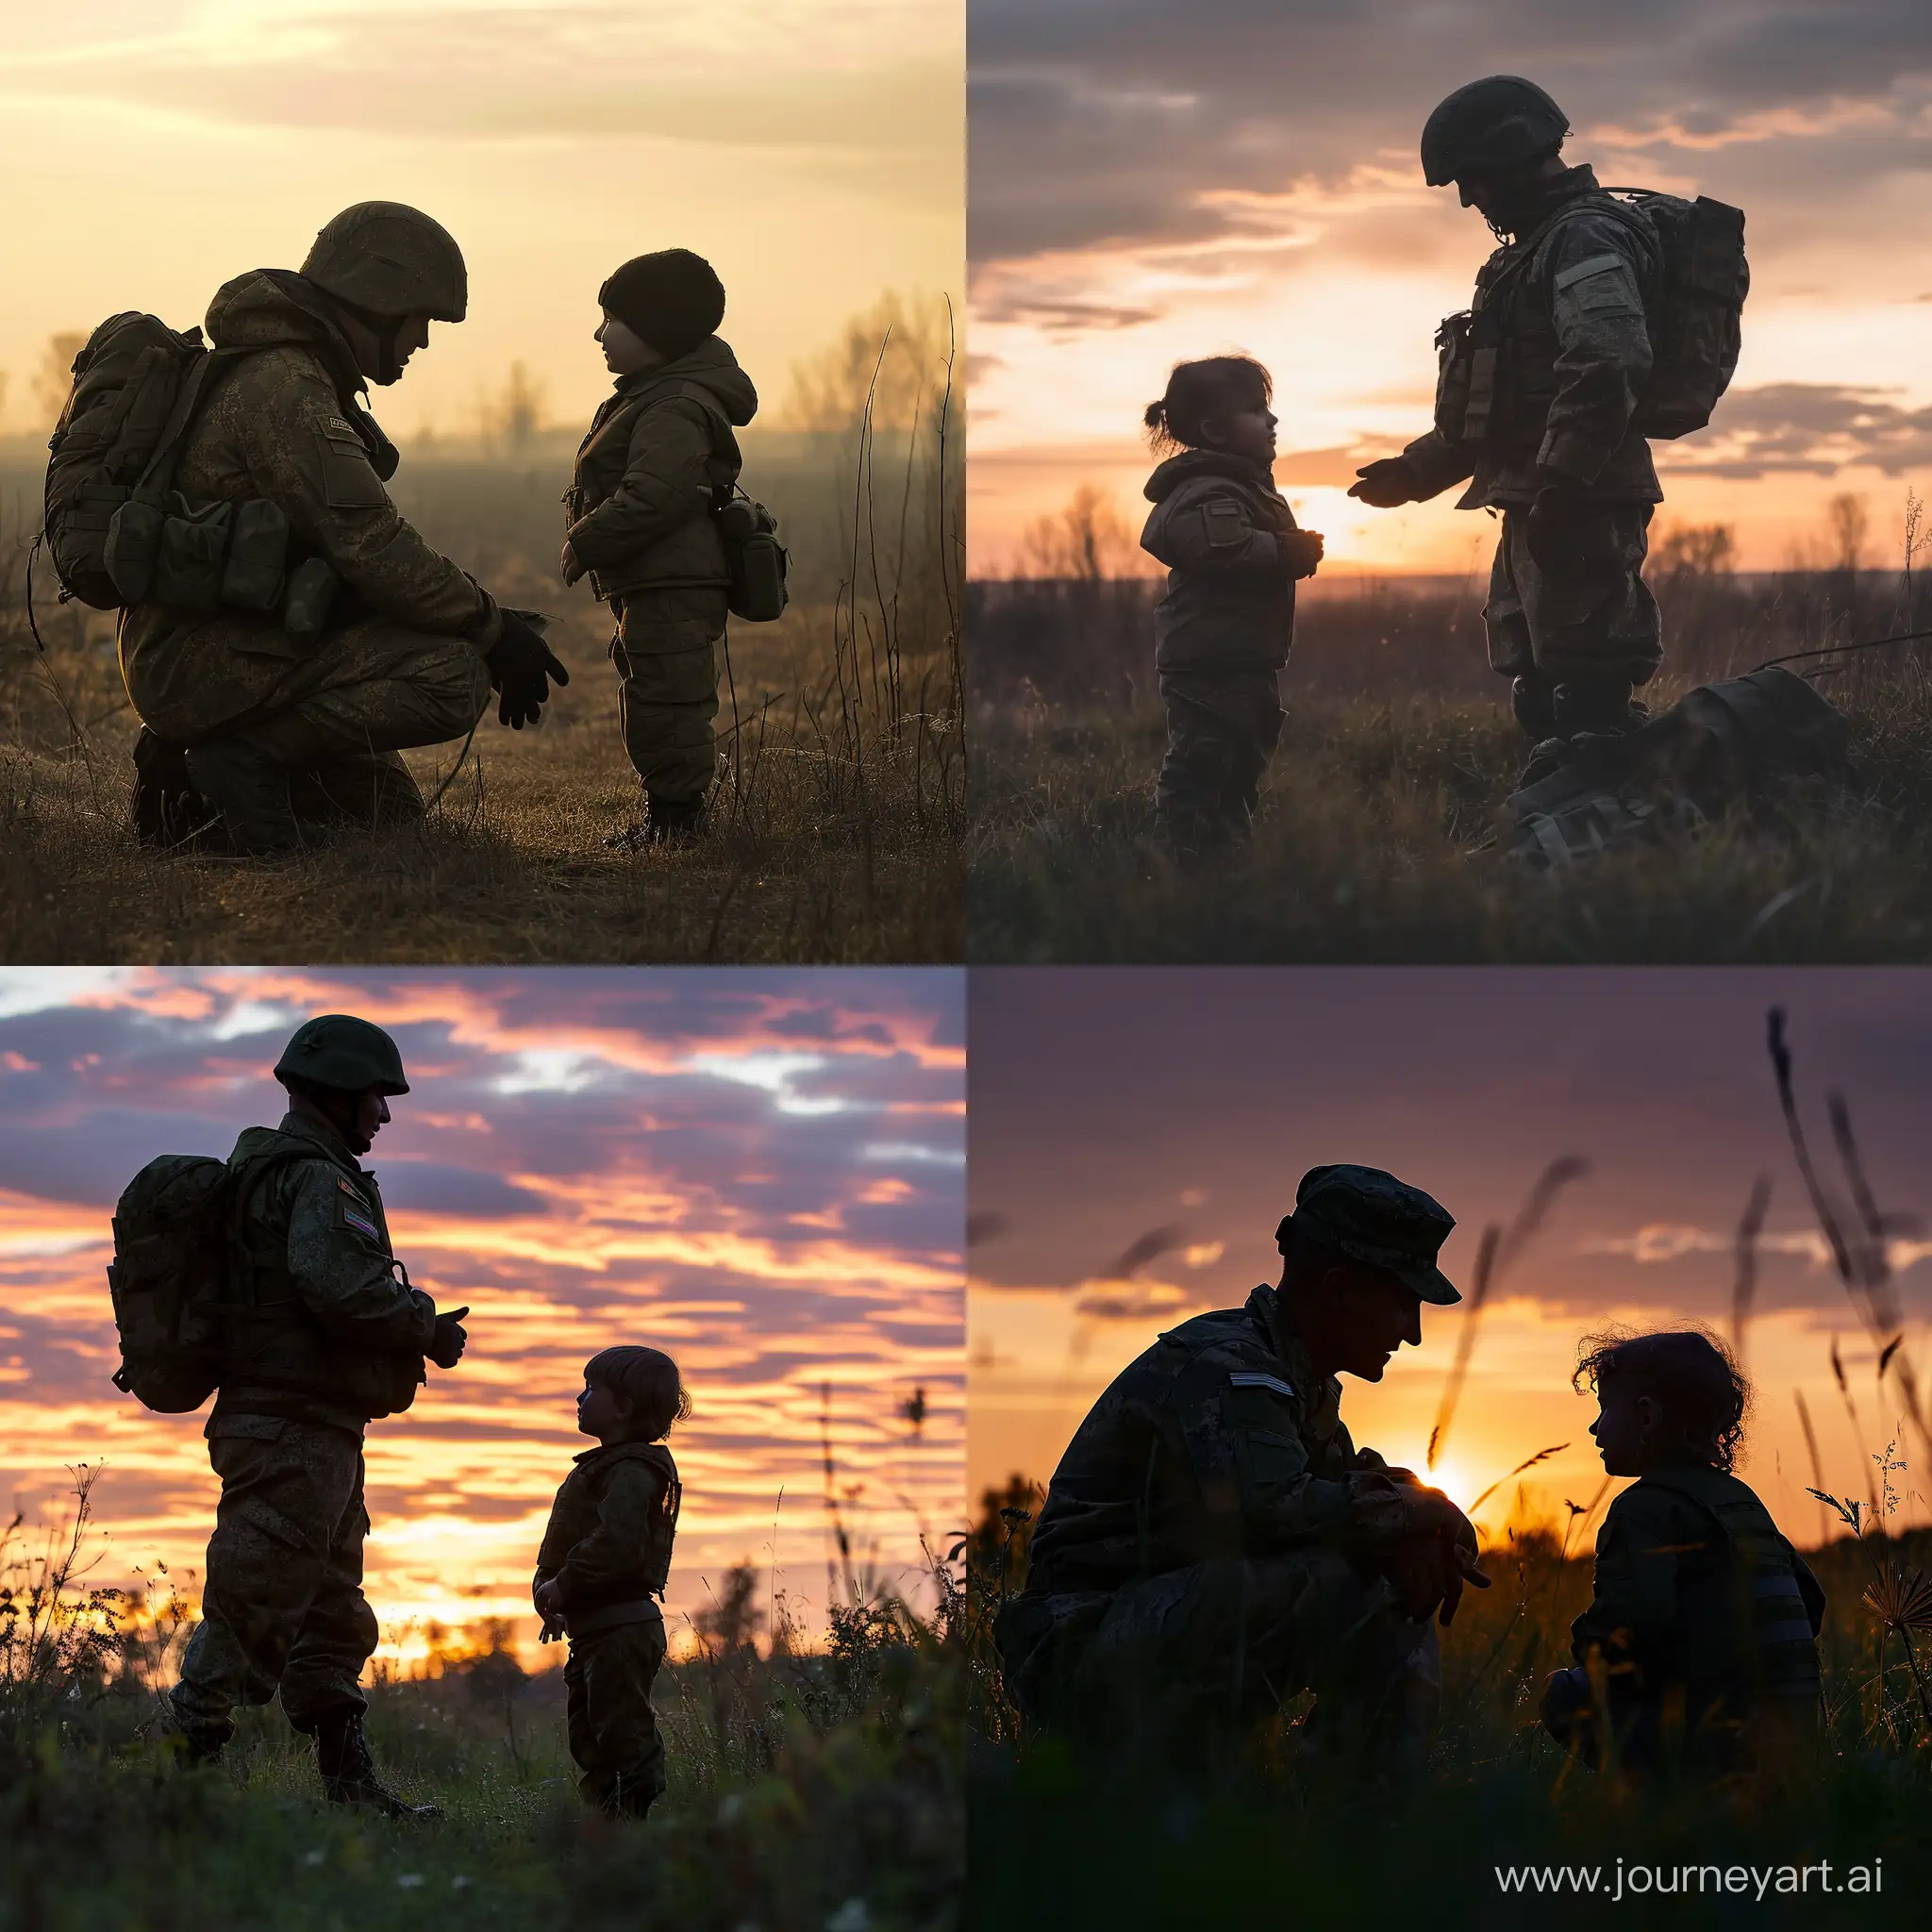 Russian-Military-Engagement-with-Child-at-Dawn-on-Grass